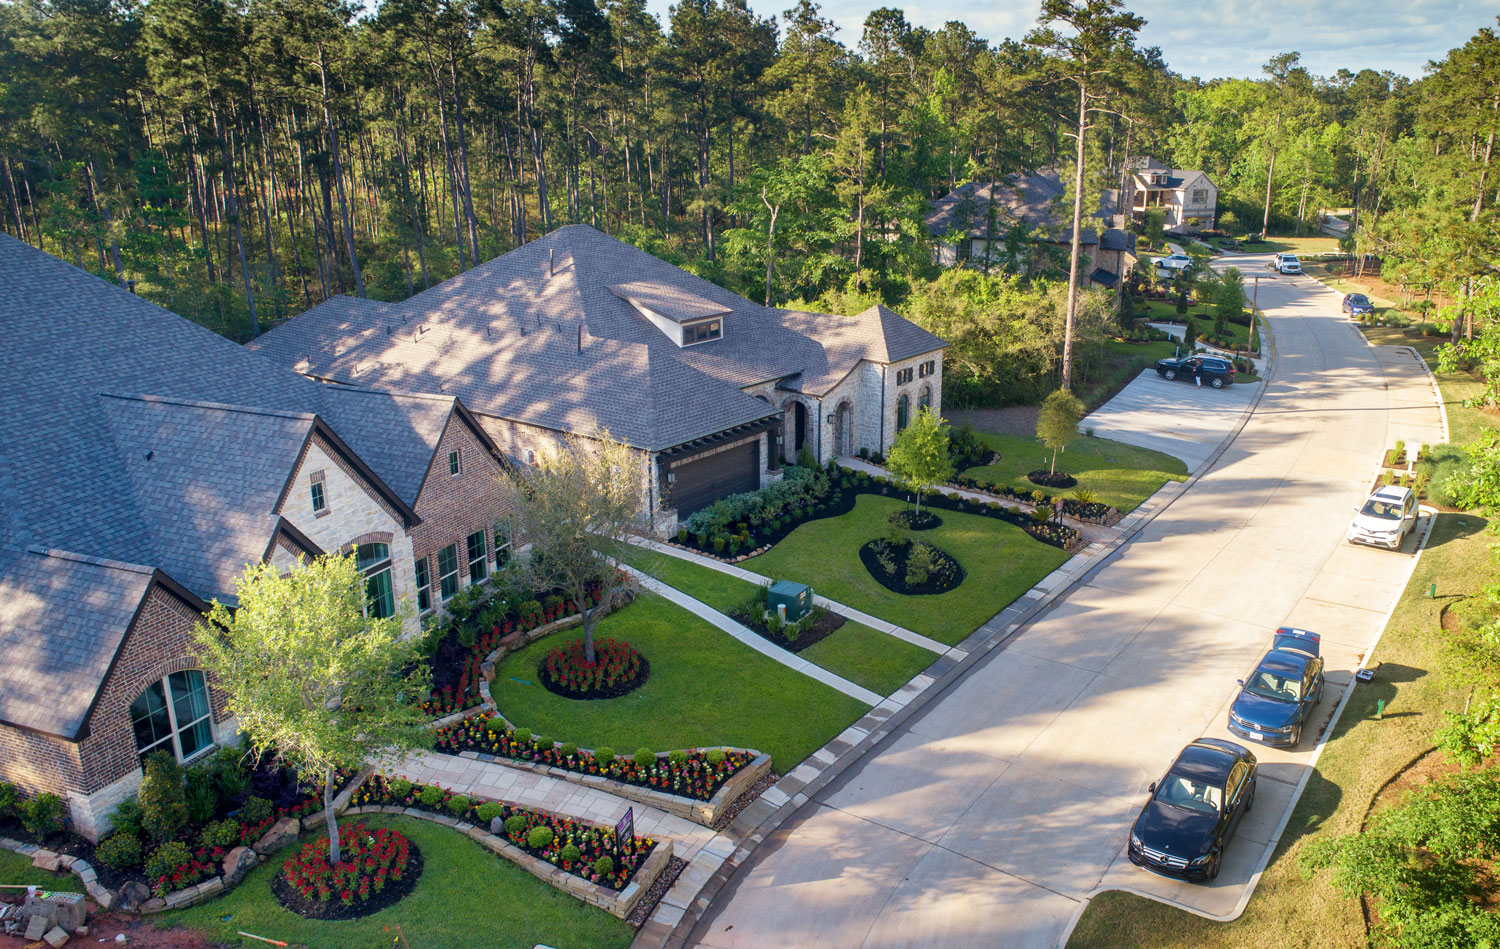 The Woodlands Hills Marks First Anniversary Milestone by Reaching over 100 New Home Sales!